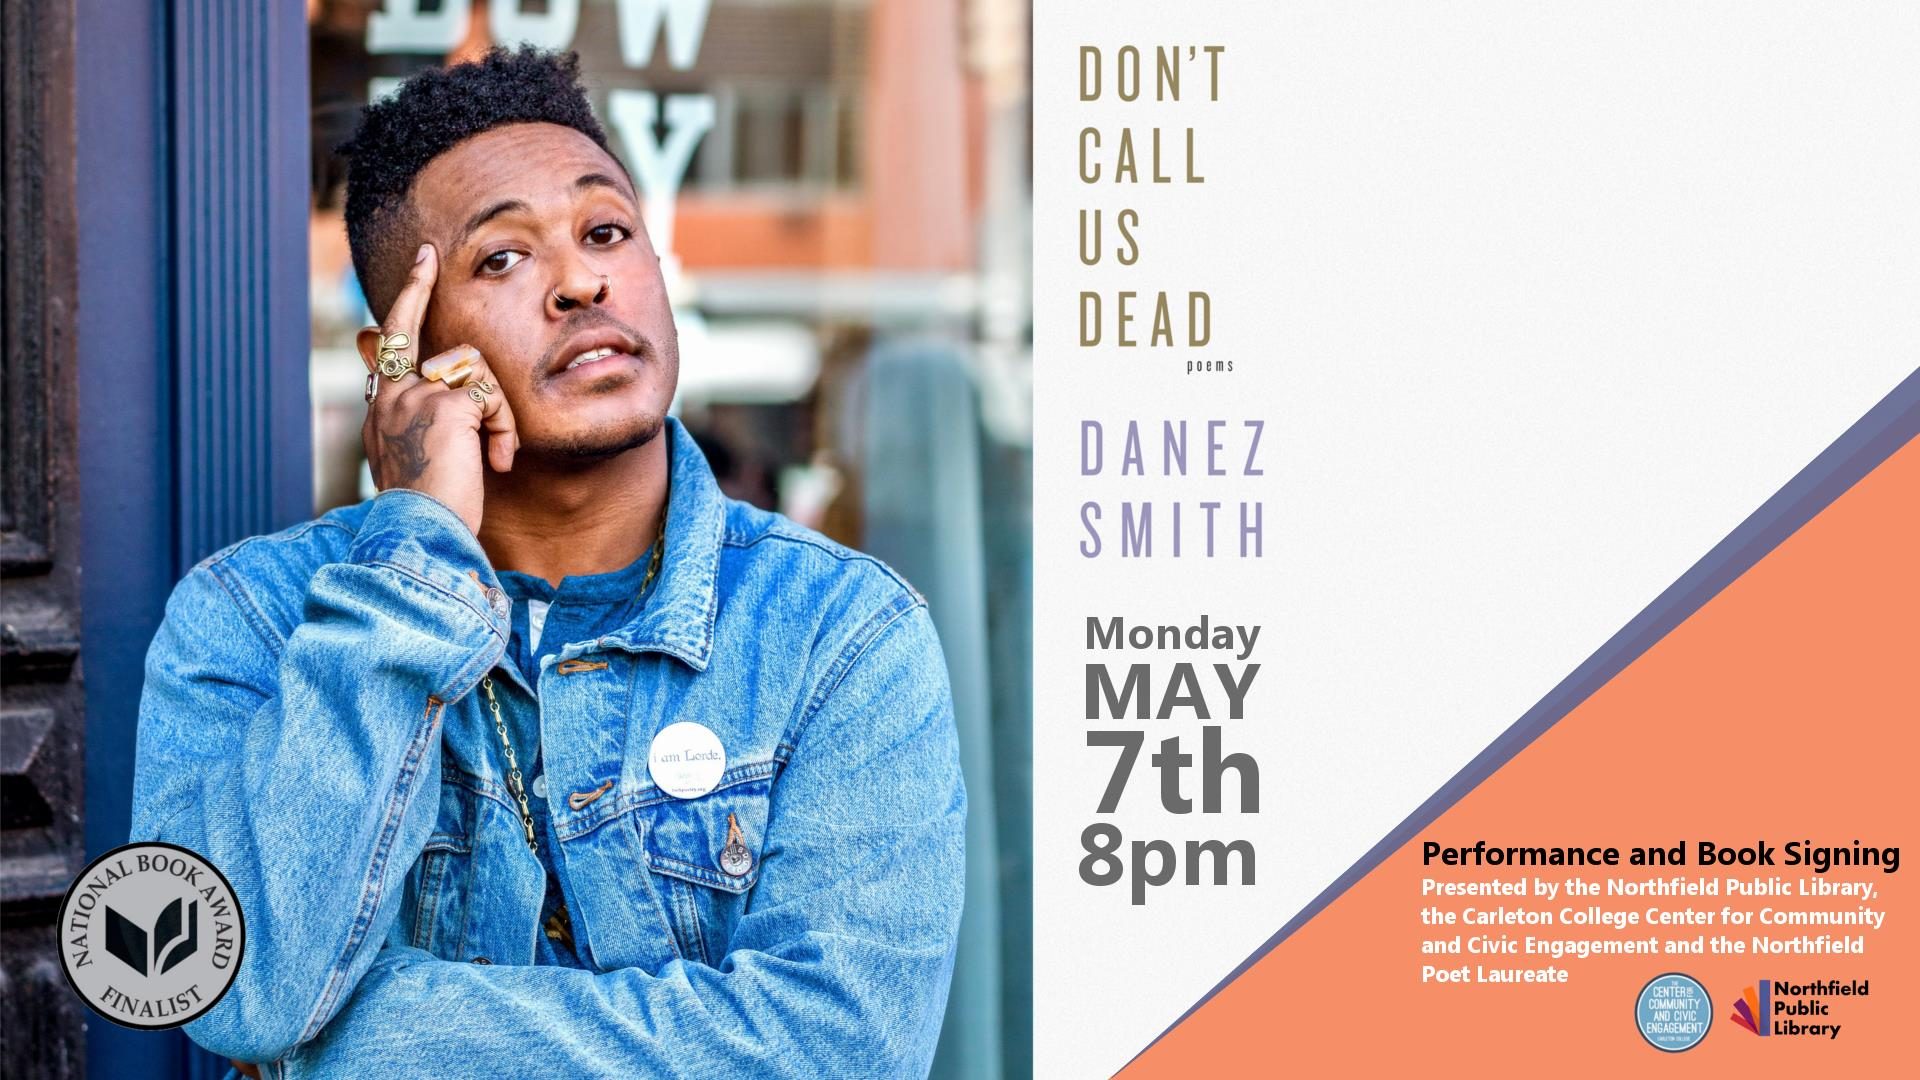 "Don't Call Us Dead", poems by Danez Smith